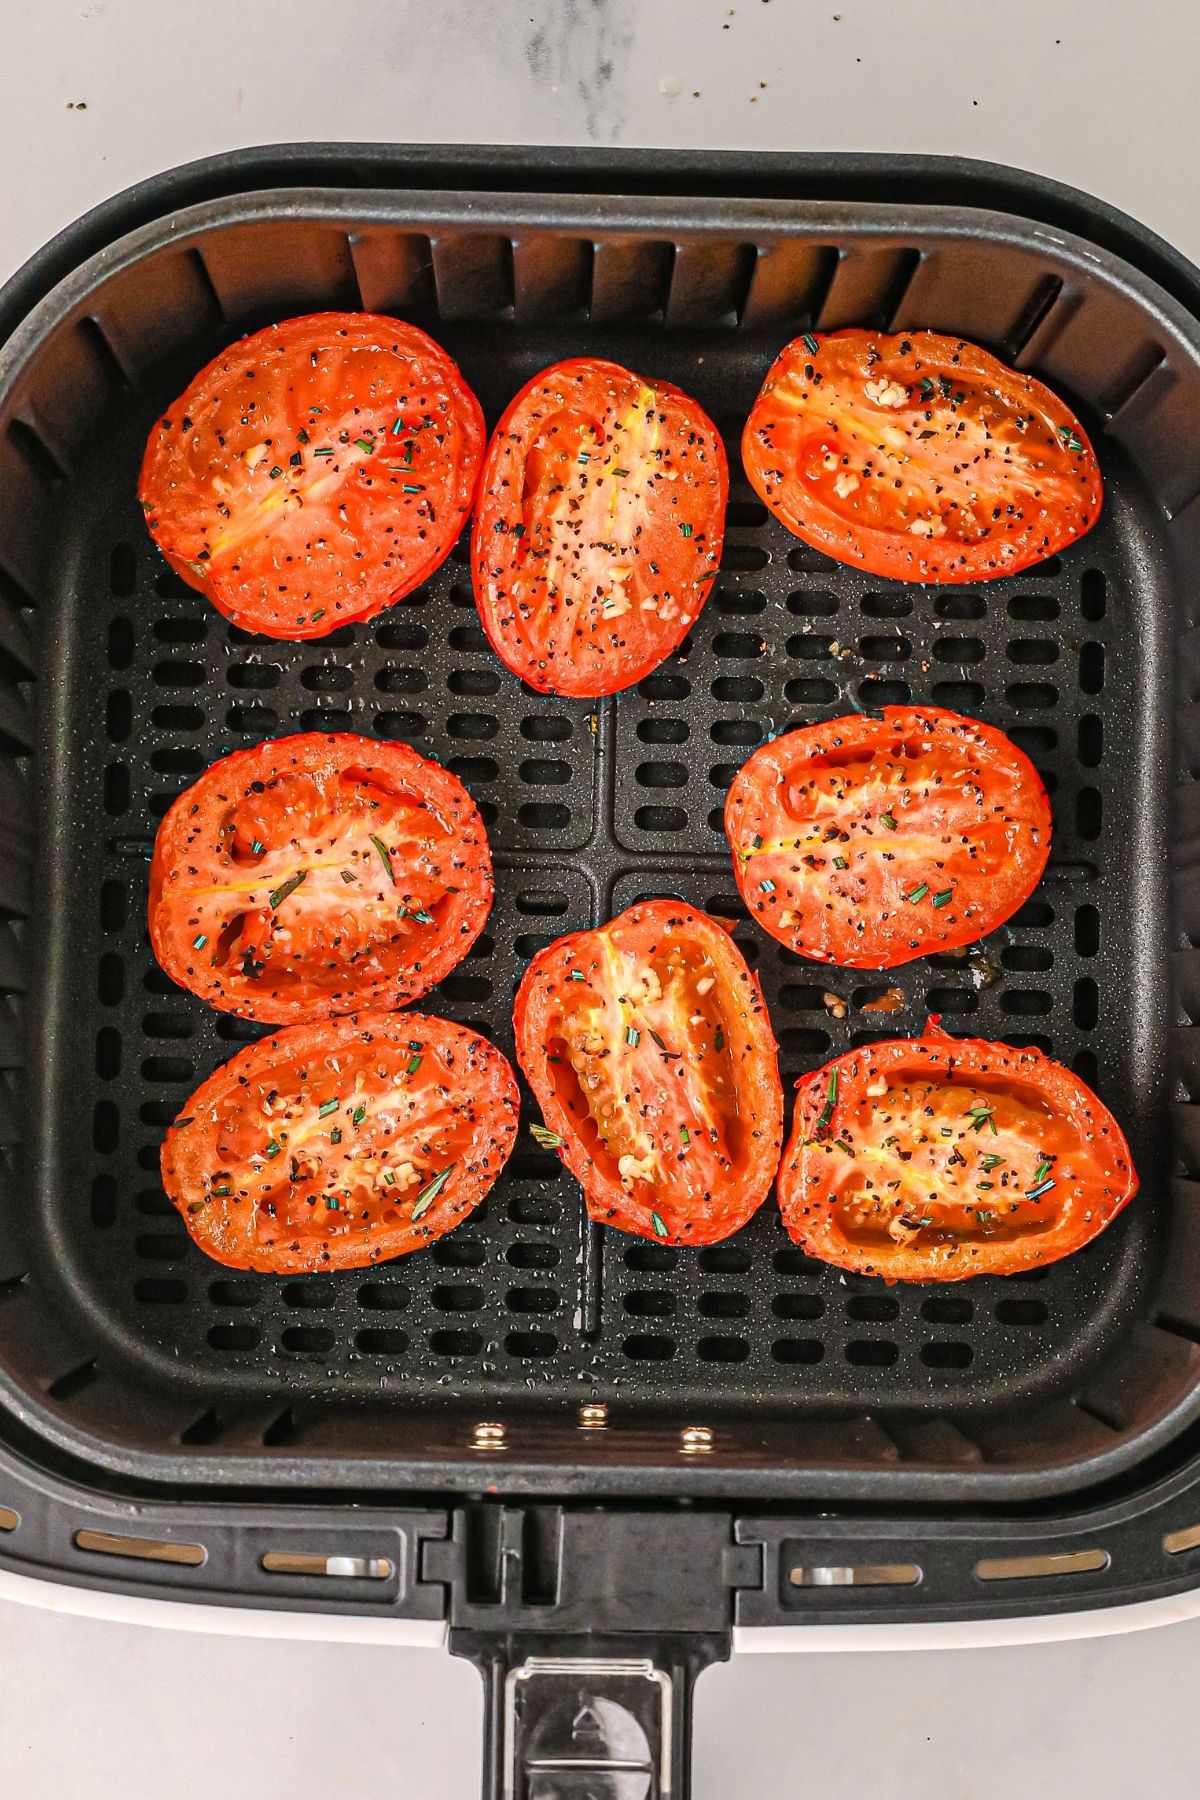 Cooked tomatoes in the air fryer basket after being seasoned. 